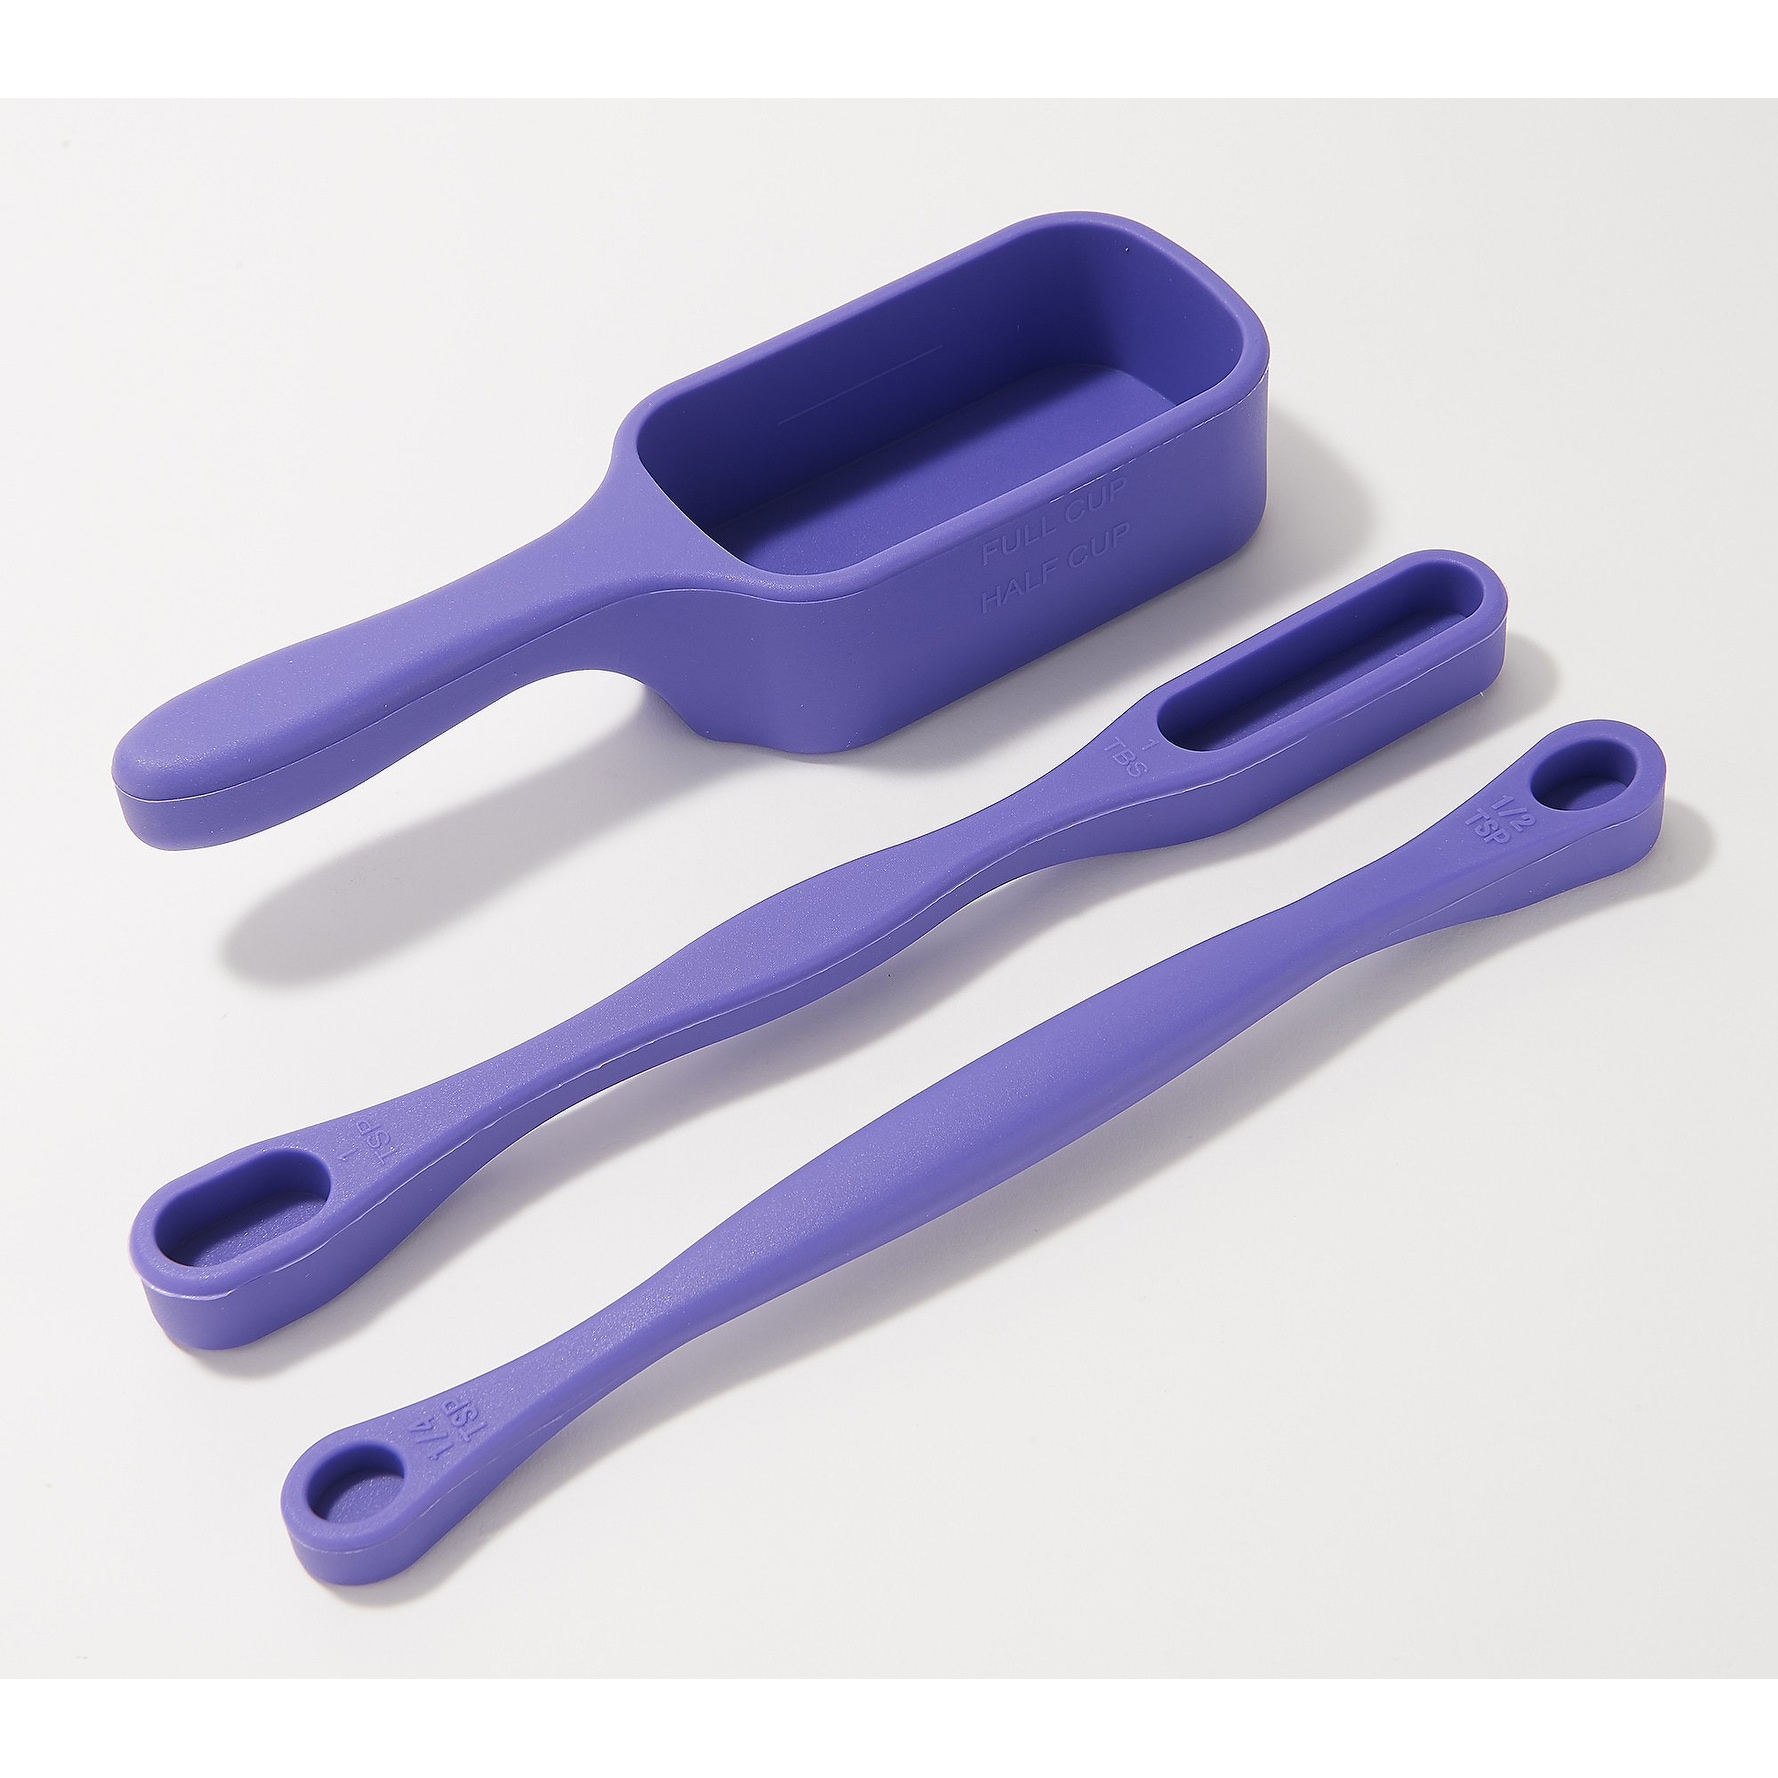 https://ak1.ostkcdn.com/images/products/is/images/direct/5c00fbf35dc3d0cb4f2bcceab1cec6c84e210fd7/Mad-Hungry-3-Piece-Silicone-Measuring-Cup-%26-Spoon-Set.jpg